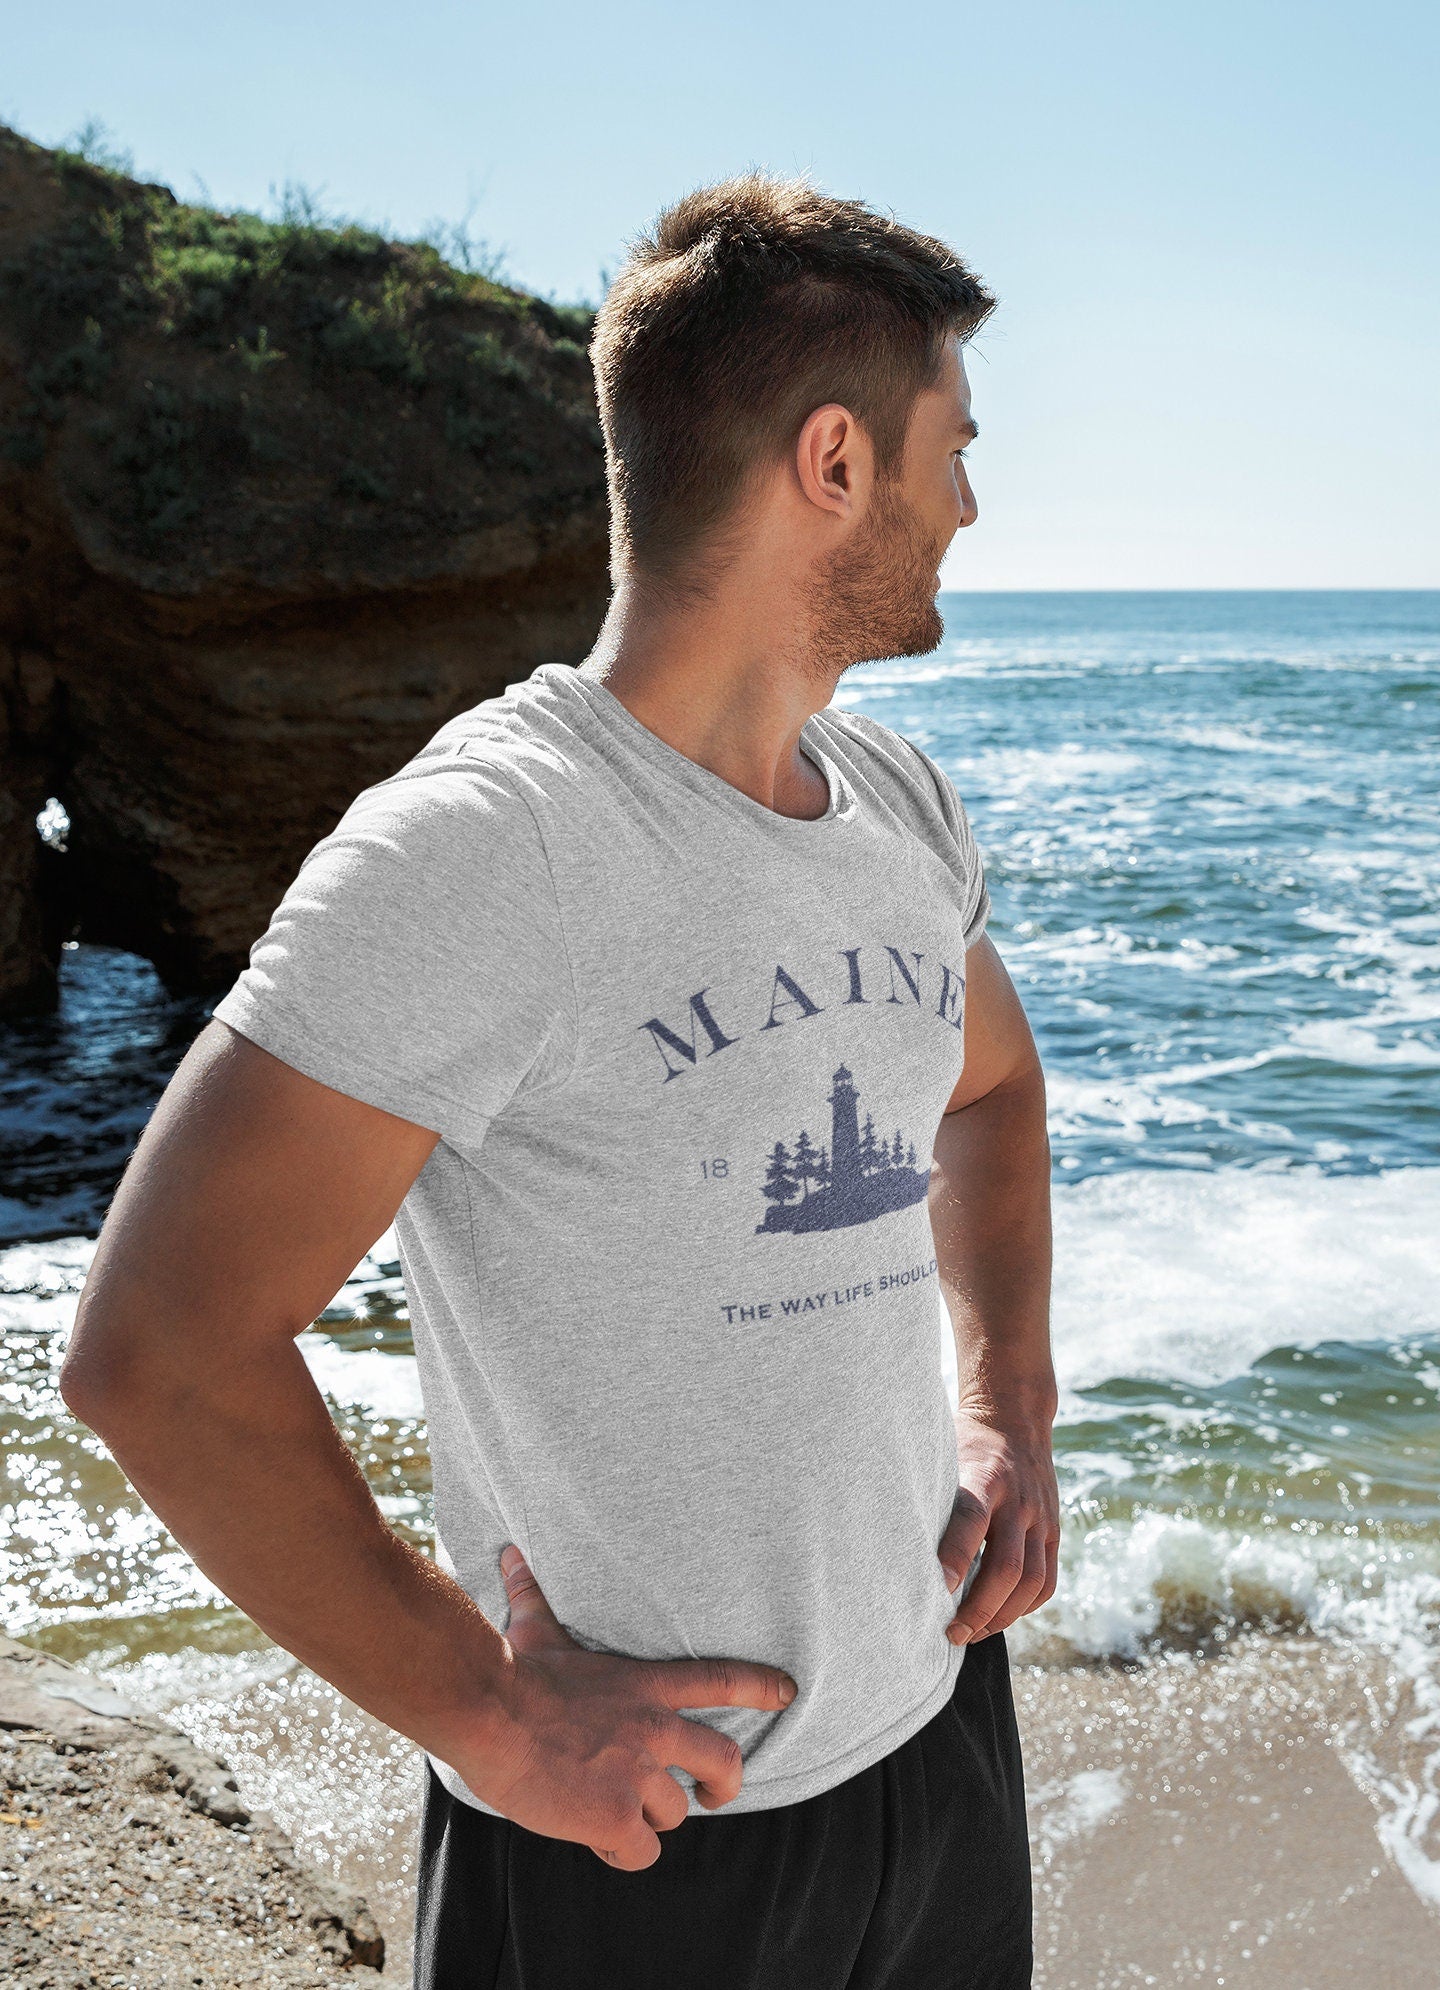 Maine - the way life should be t-shirt